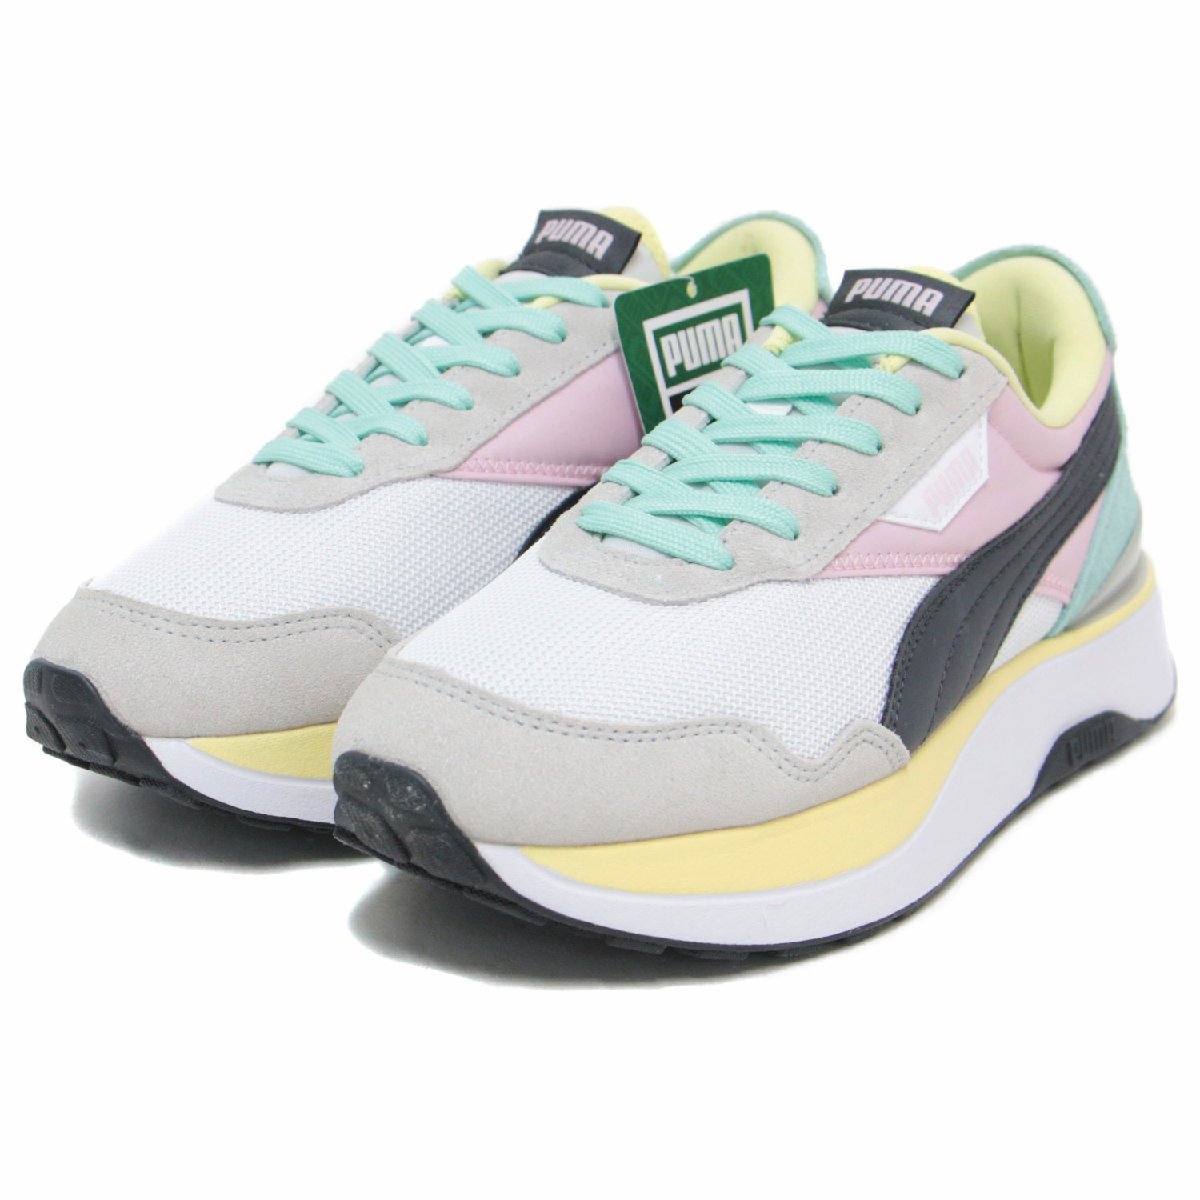  new goods PUMA Puma shoes shoes sneakers low cut thickness bottom race up color b locking CRUISE RIDER cruise rider 375072